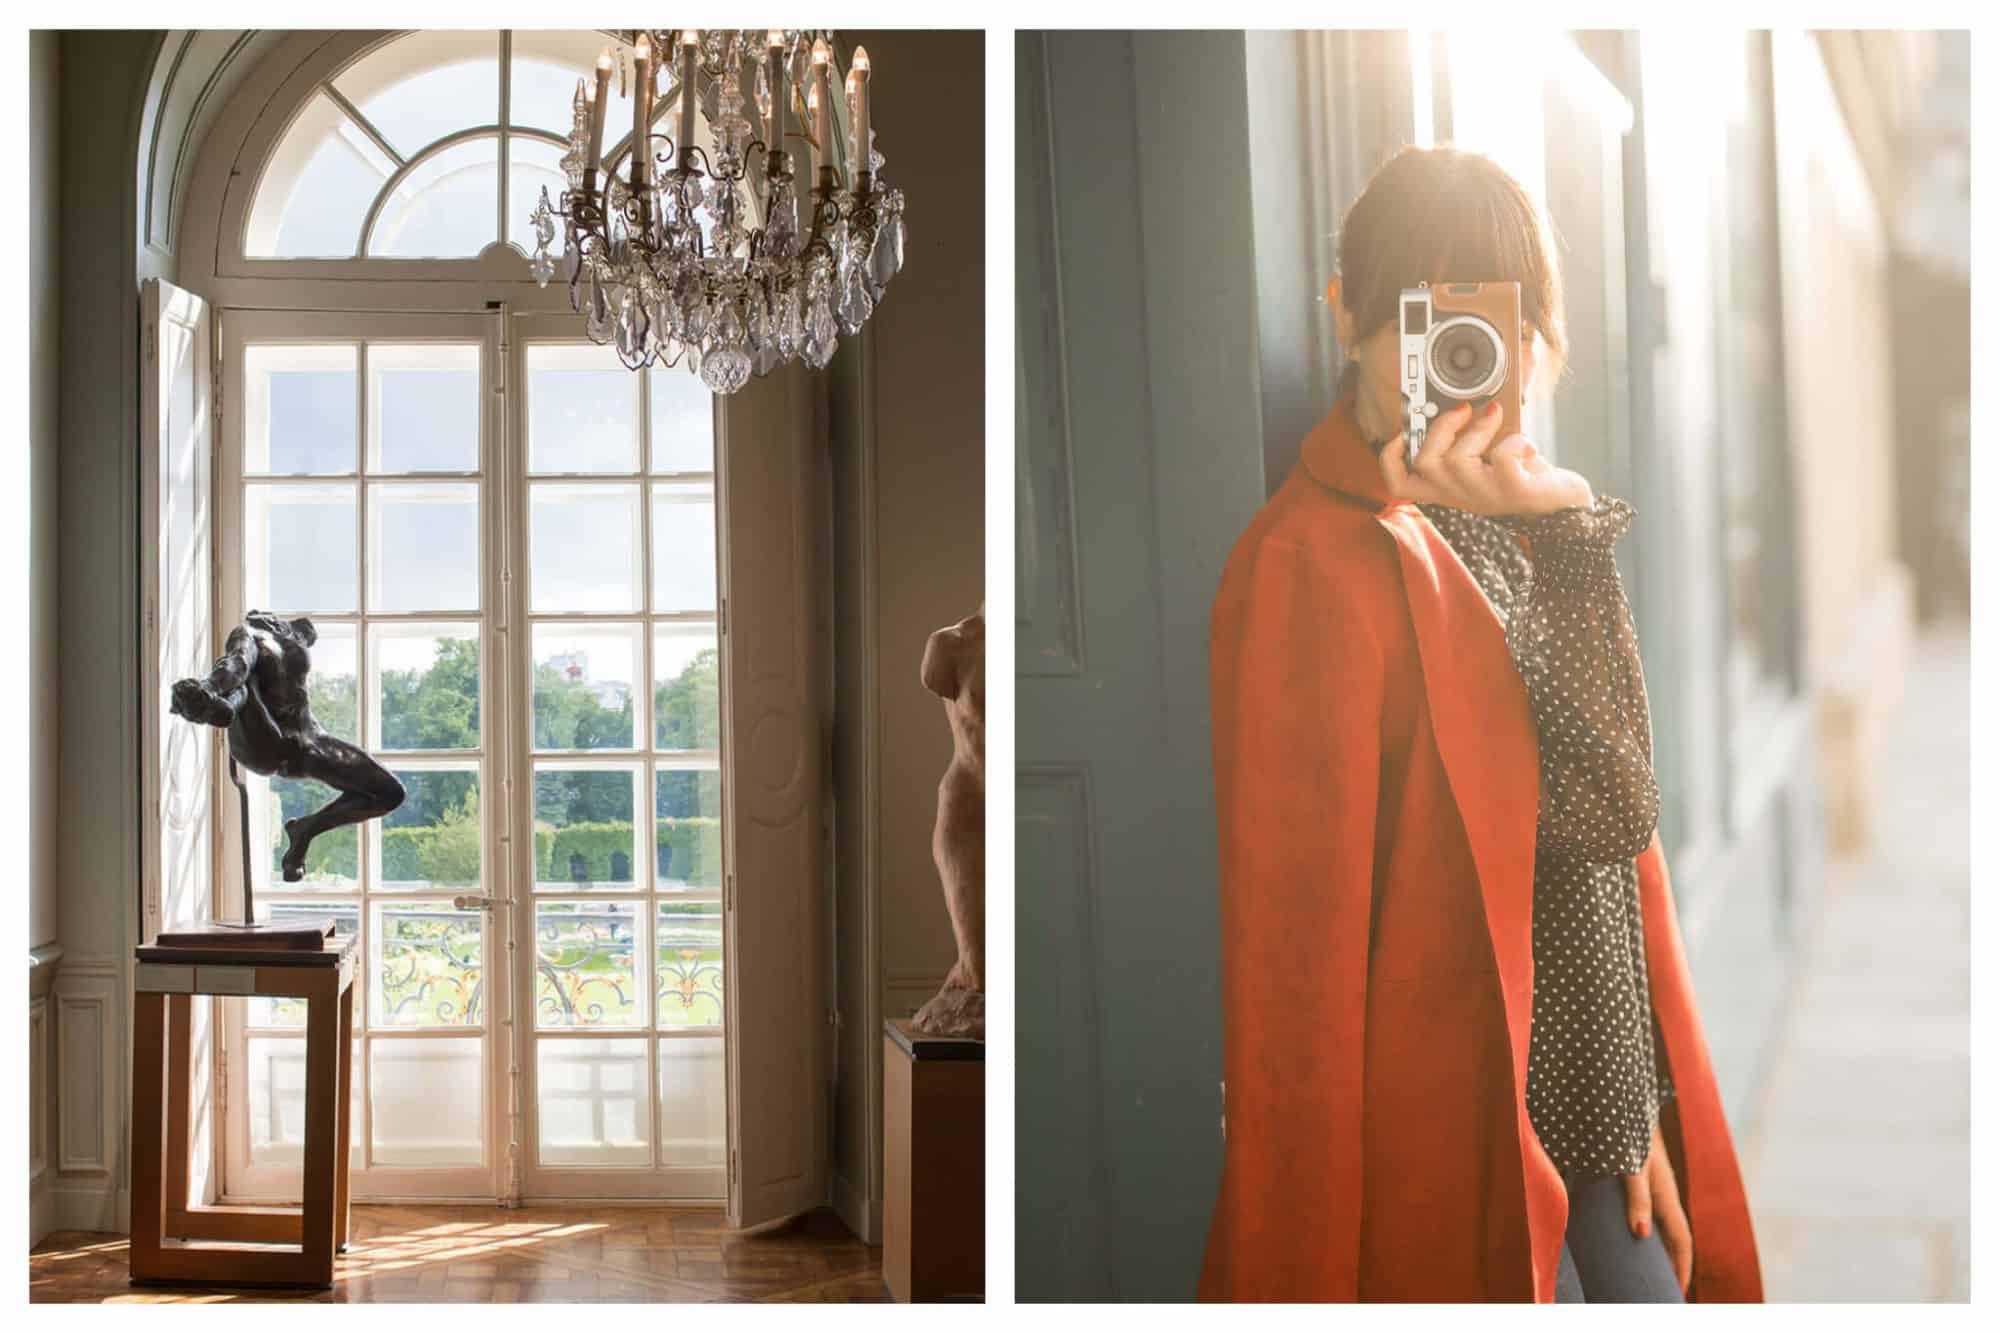 On left: French doors look out onto a sunny afternoon in the garden at the Musée Rodin, in Paris' 7th arrondissement. On right: Rebecca holds up her retro camera for a photograph at golden hour in Paris. 